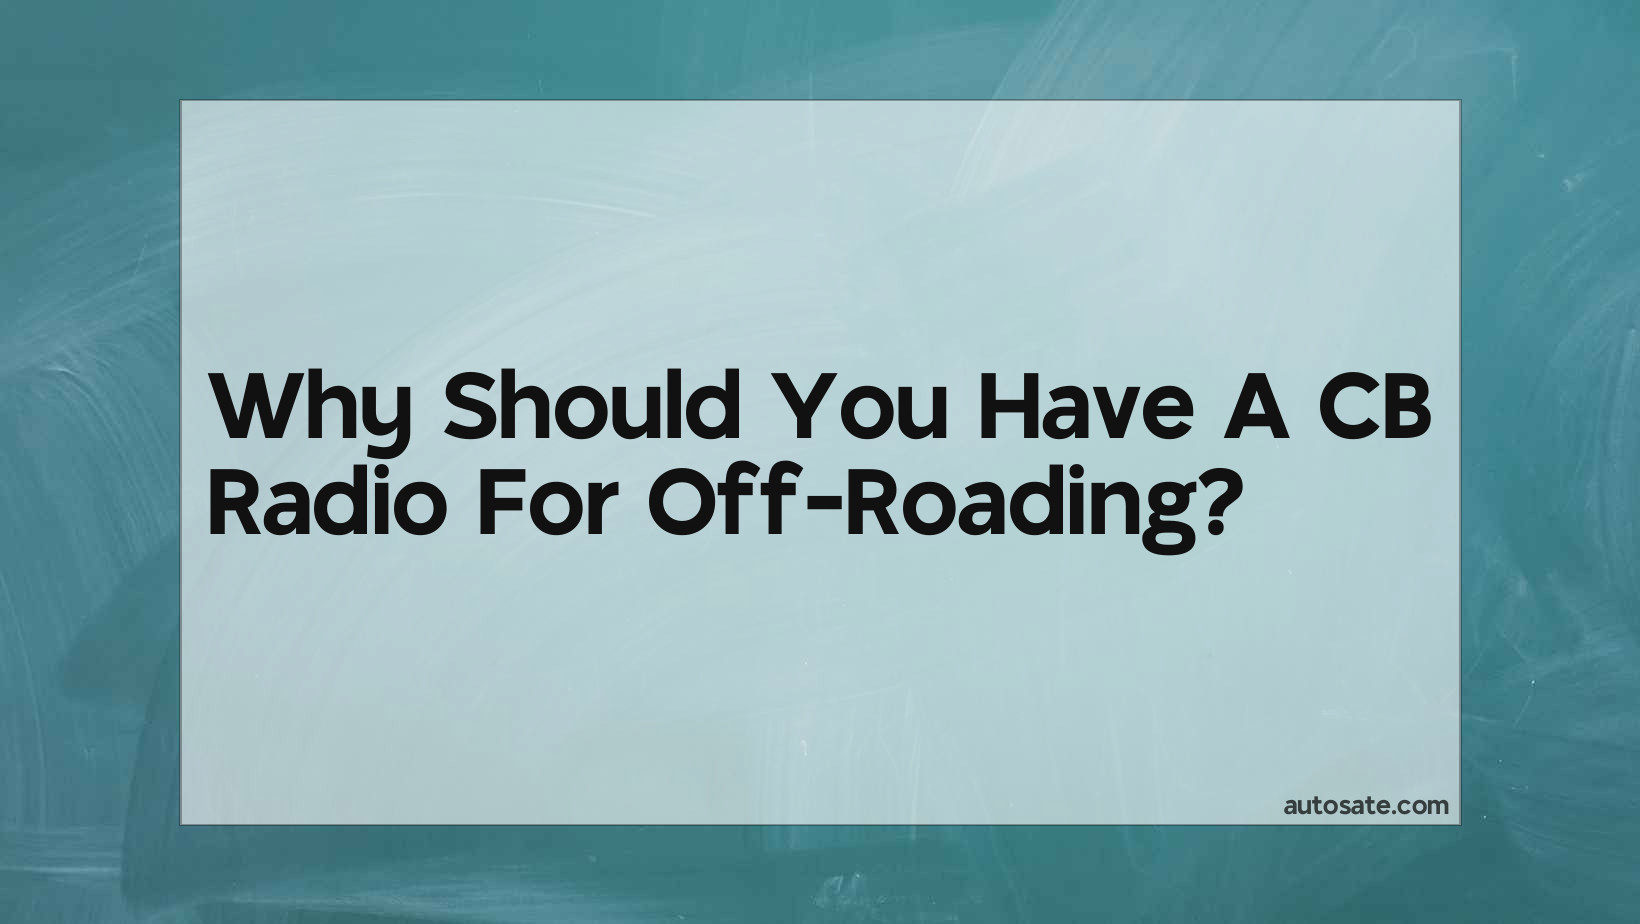 Why Should You Have A Cb Radio For Off-Roading